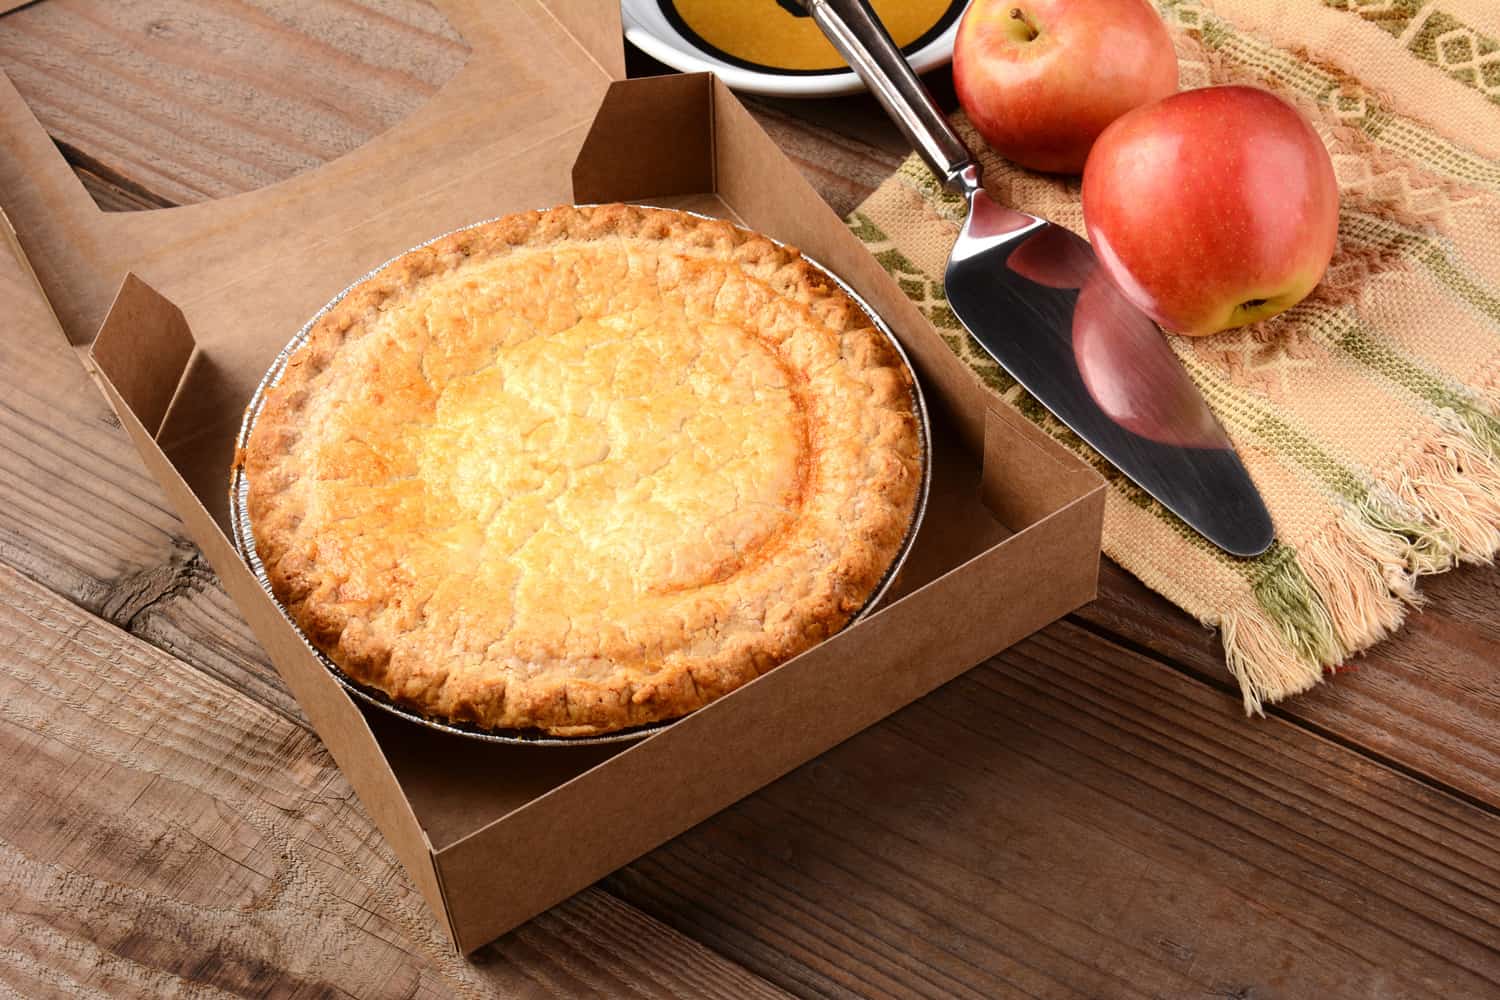 Closeup of a fresh apple pie in a bakery box on a rustic wood table. A plate, serving utensil and fresh Fuji apples are in the background. Horizontal format.